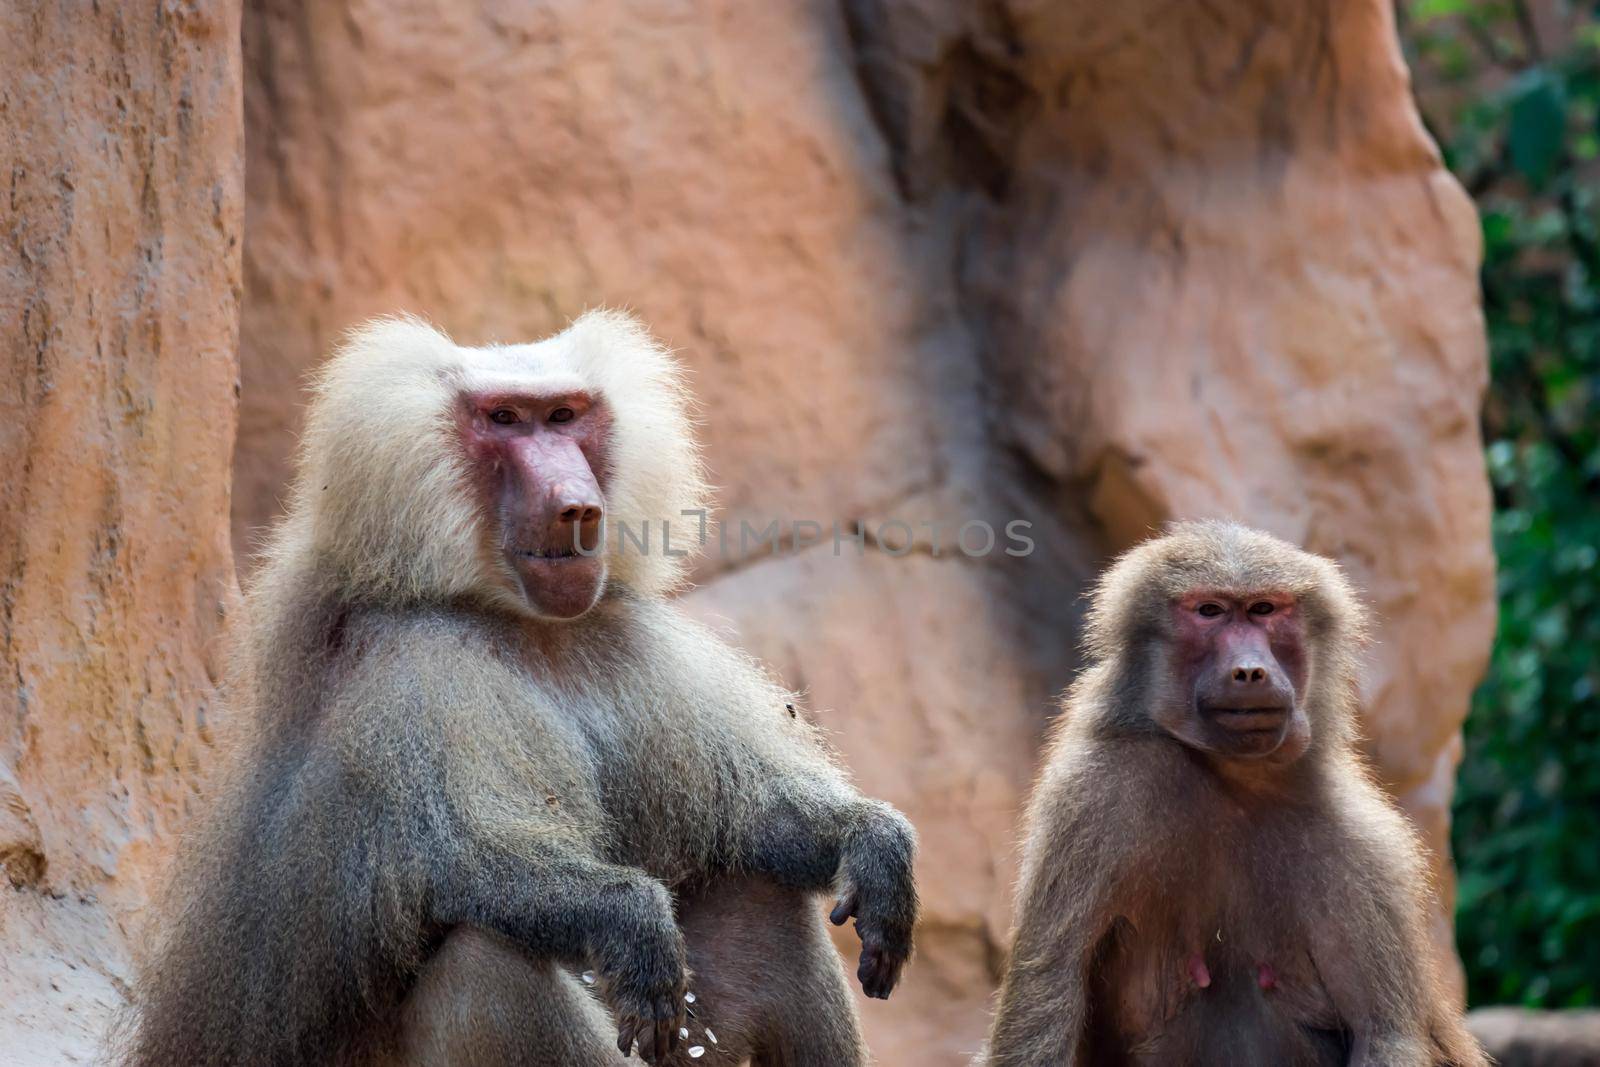 Hamadryas baboon sitting and observing in a zoo in Singapore